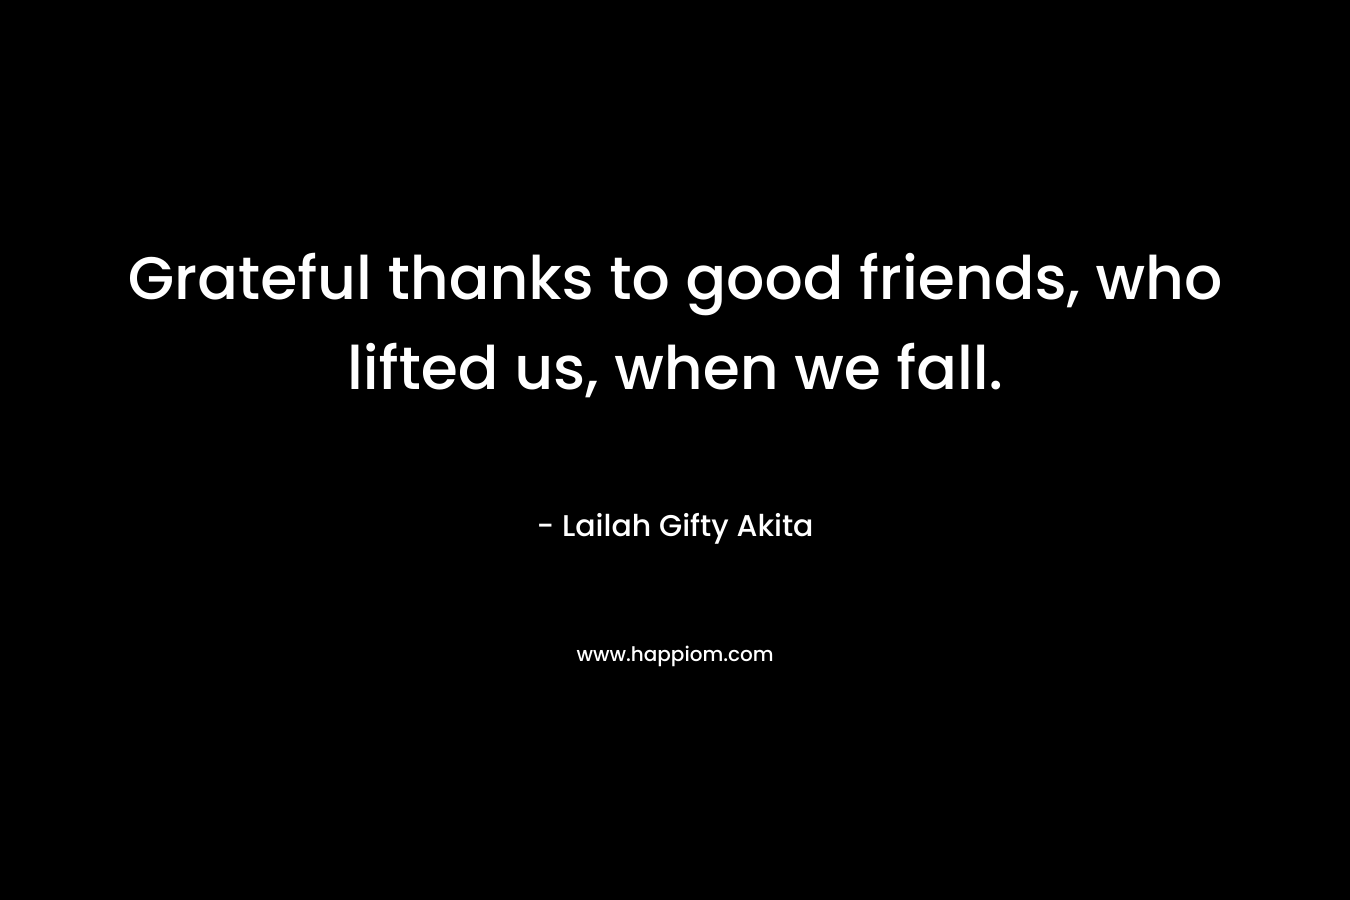 Grateful thanks to good friends, who lifted us, when we fall.